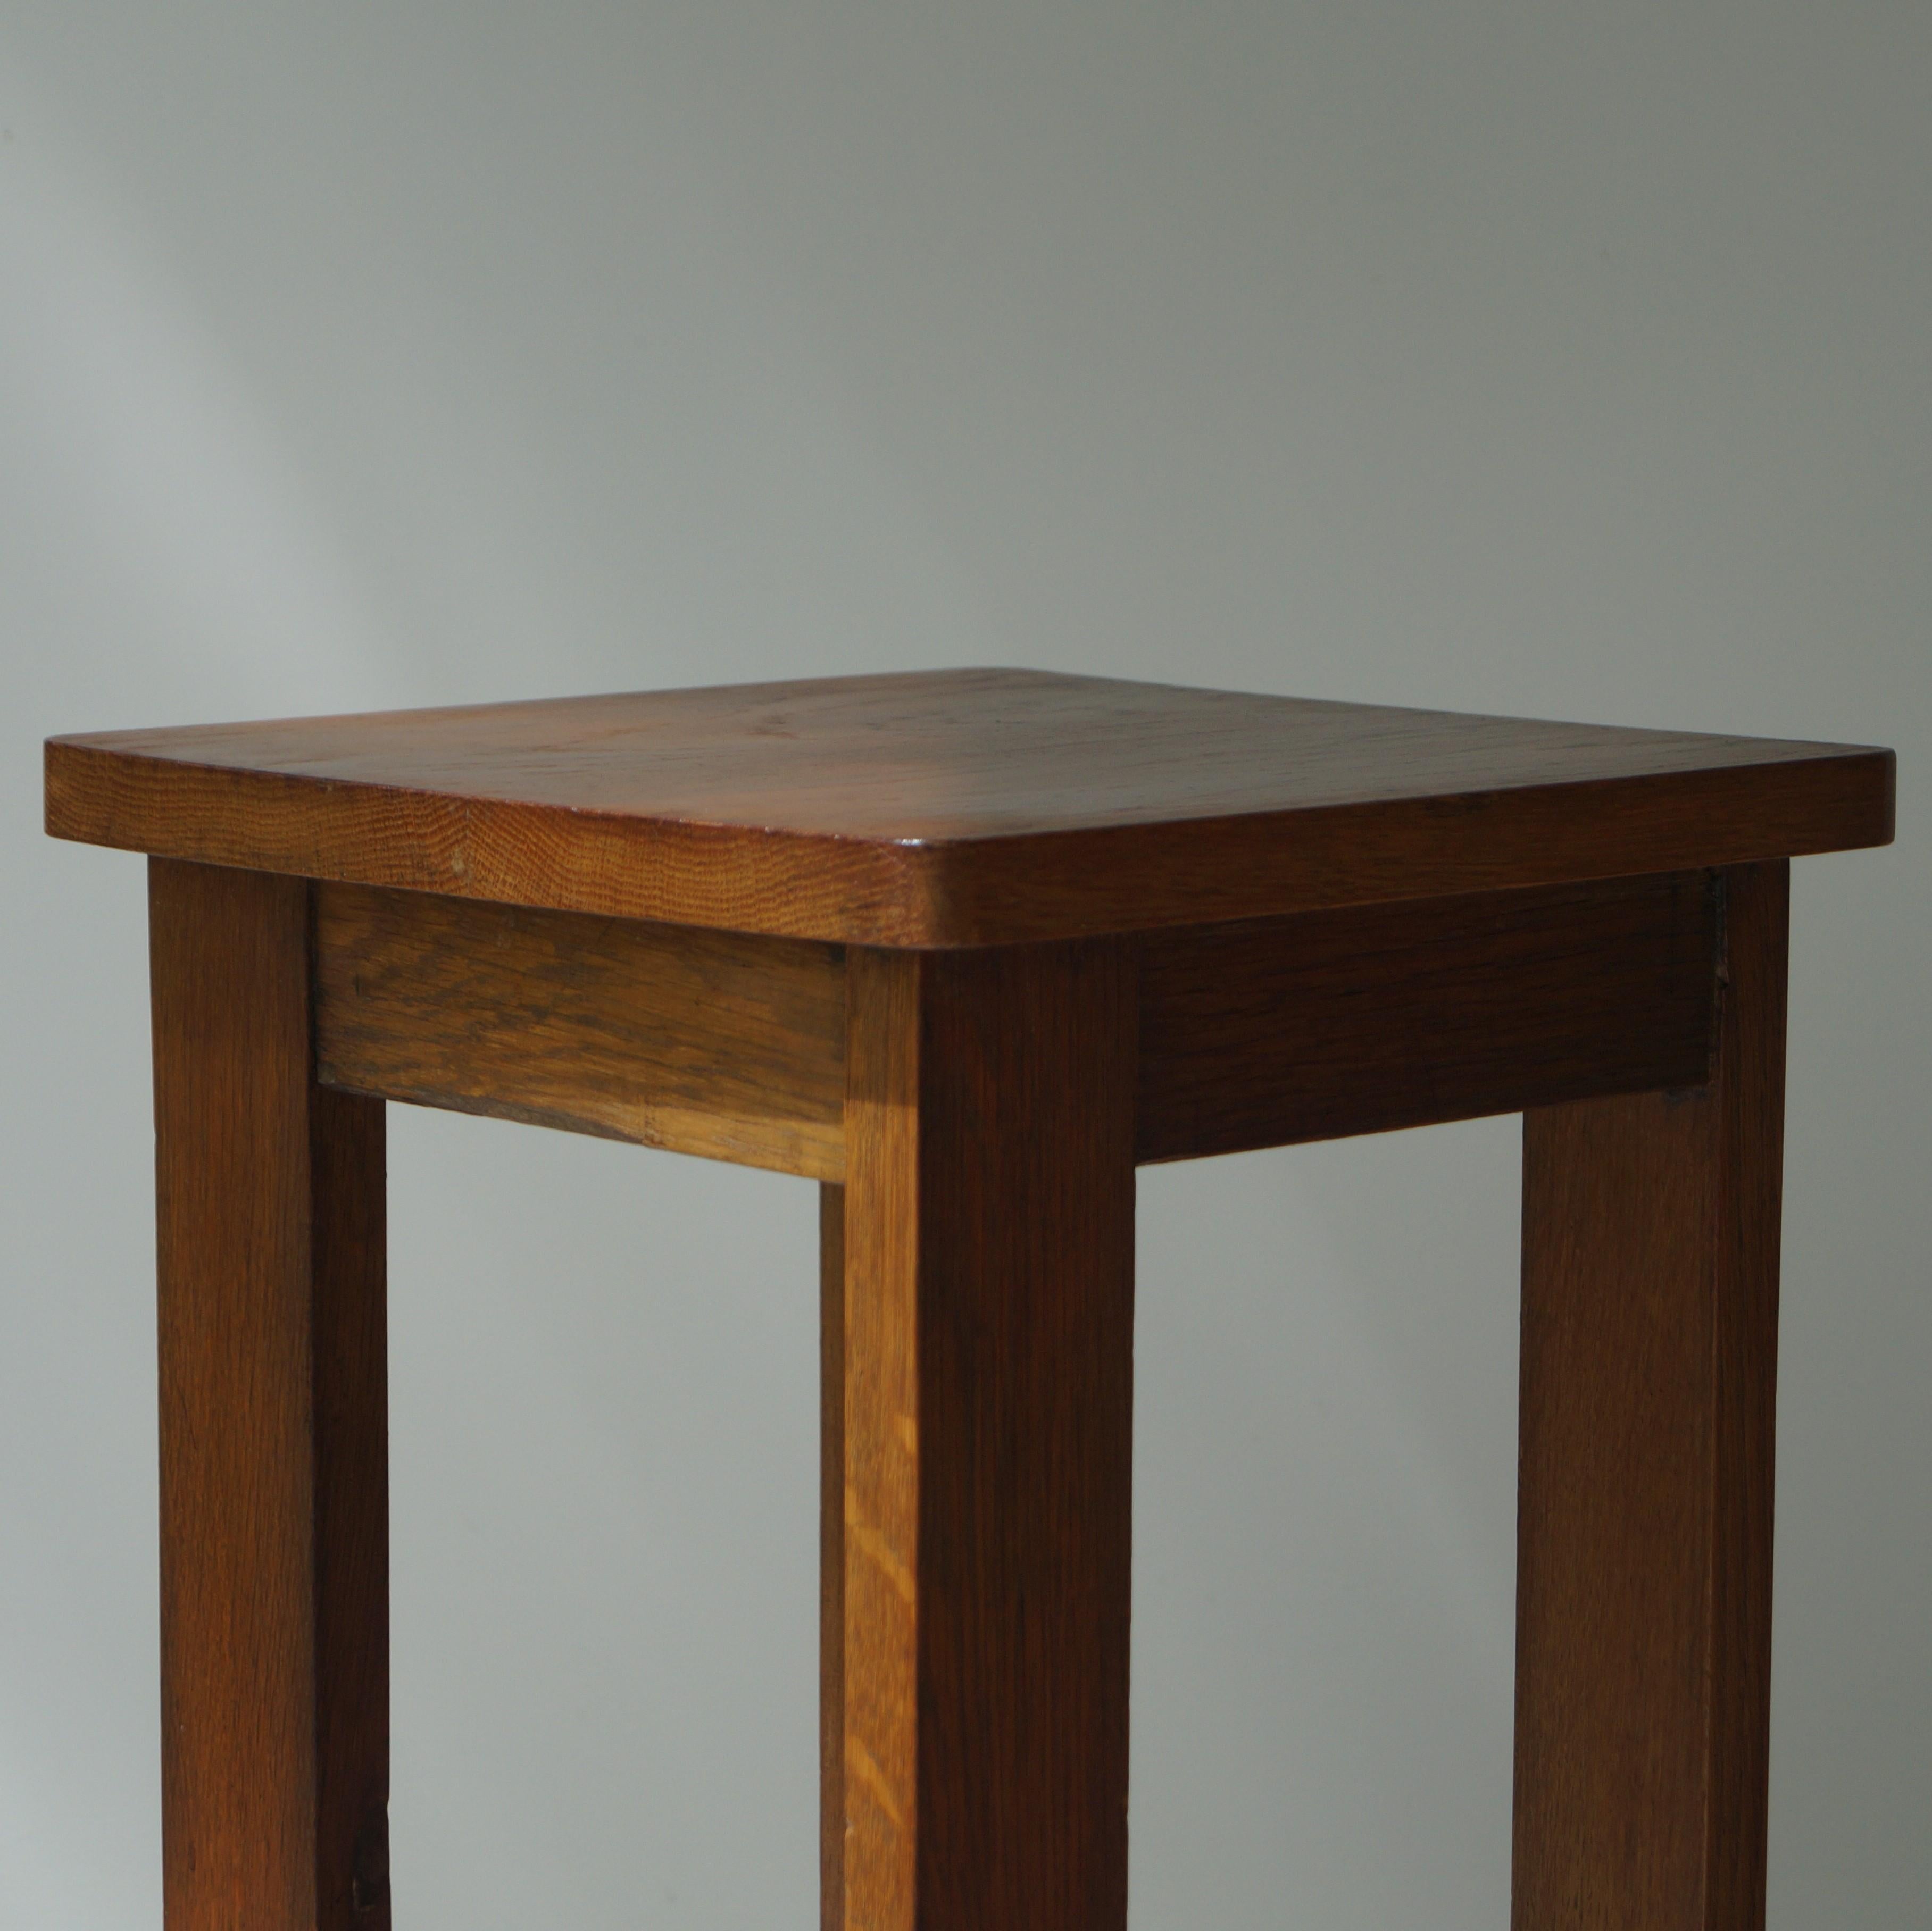 Dutch Art Deco Haagse School side table attributed to Jan Brunott, 1920s For Sale 1